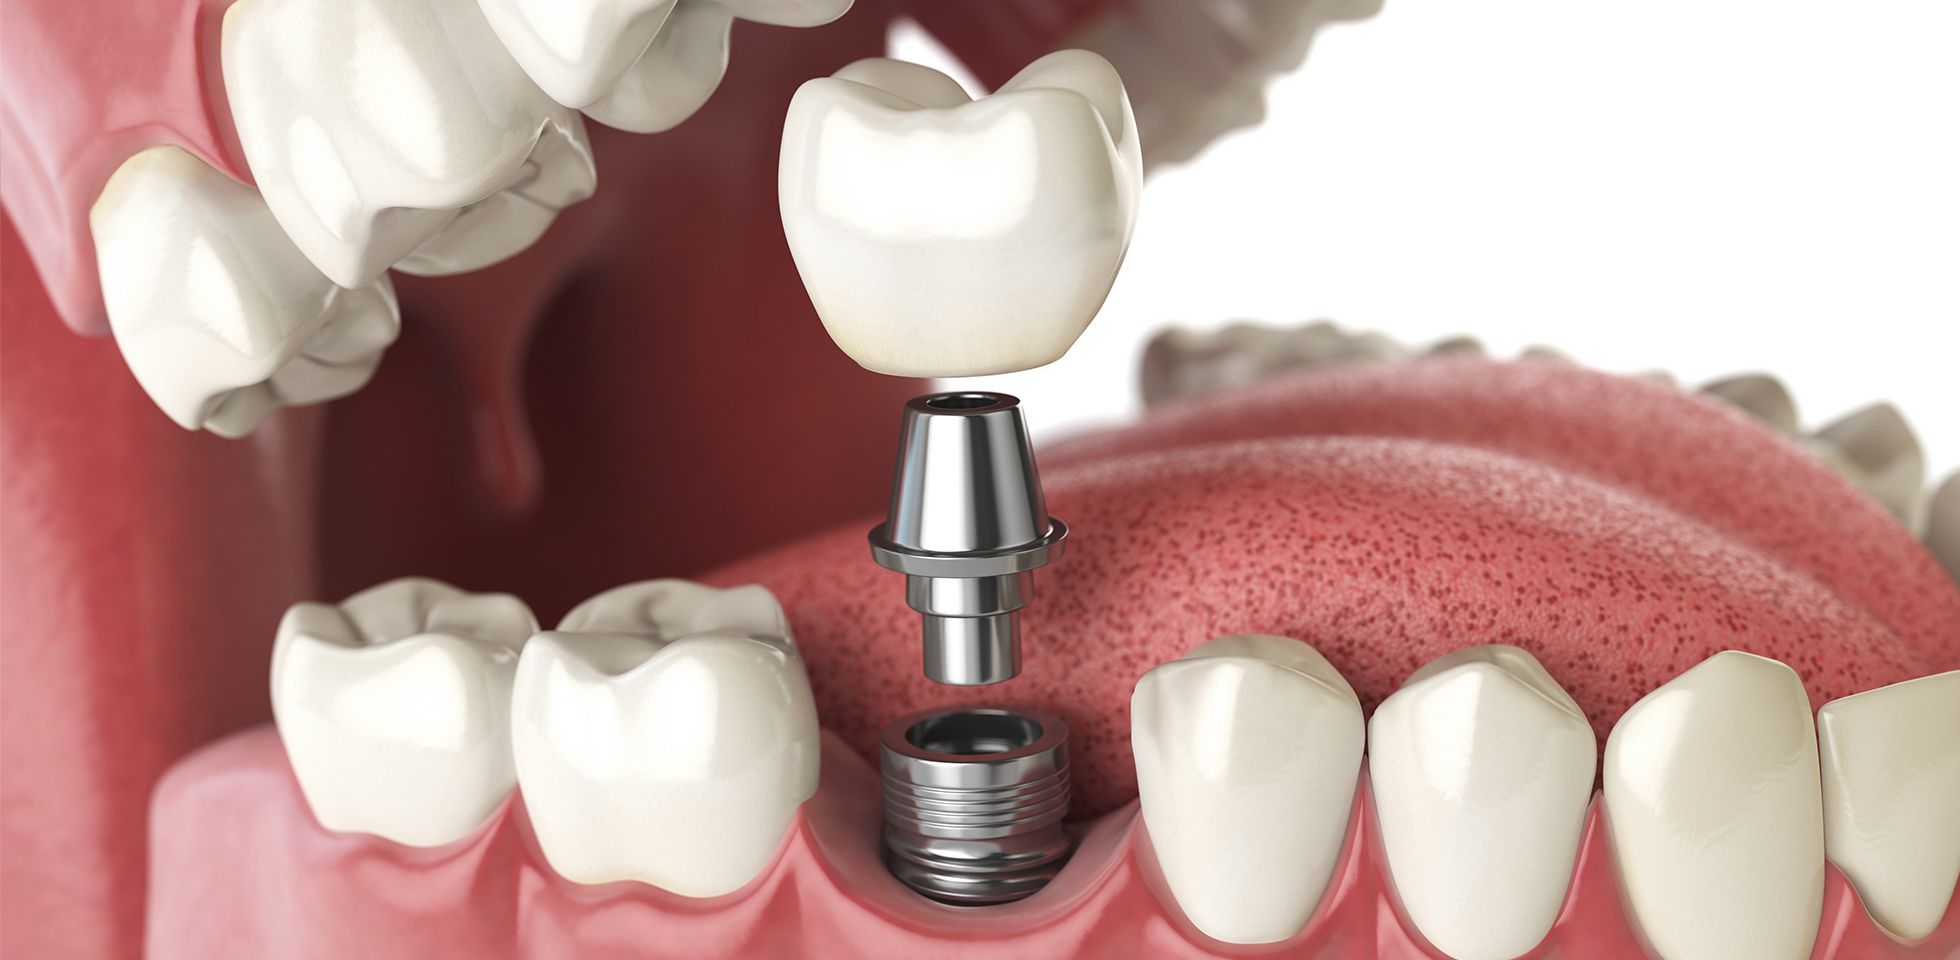 Lost a Tooth? Replace it with a Dental Implant and Crown